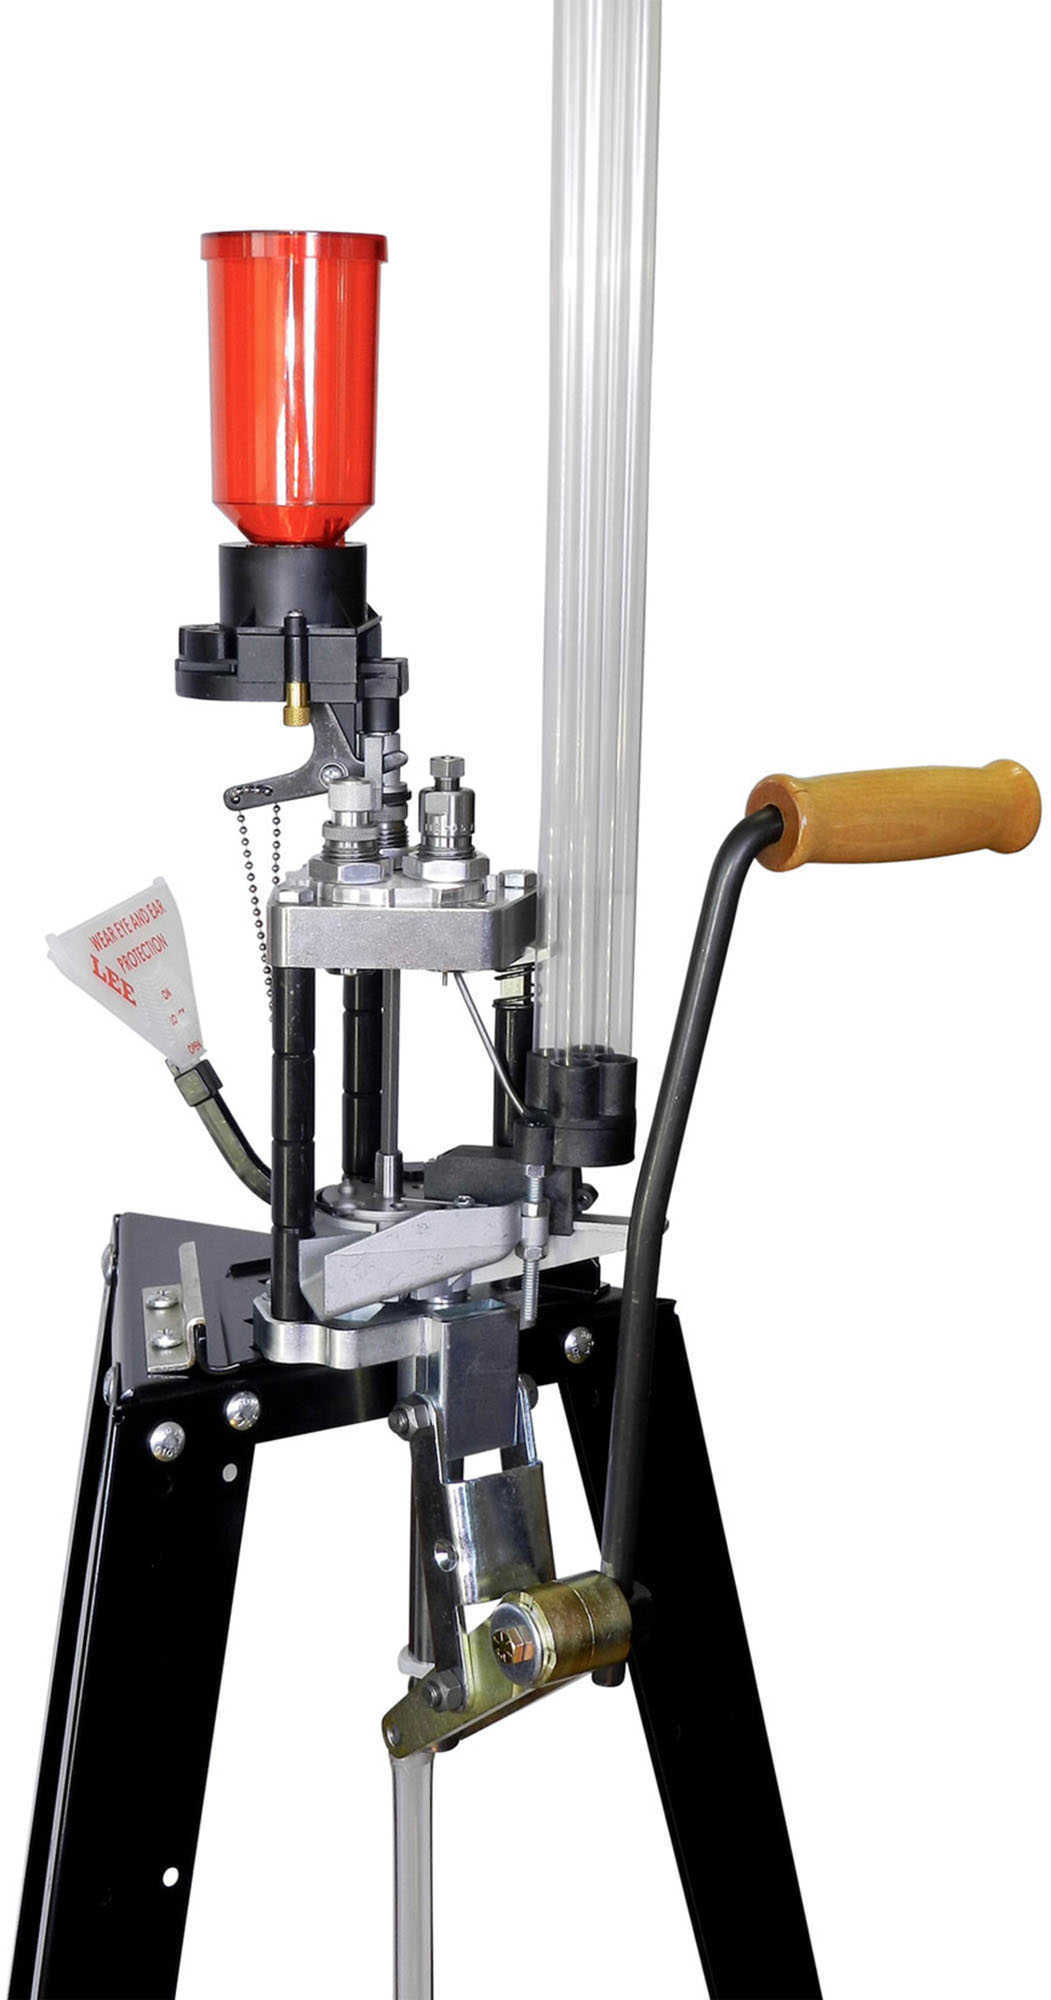 Lee Pro 1000 Reloading Kit For 380 Auto Md: 90641